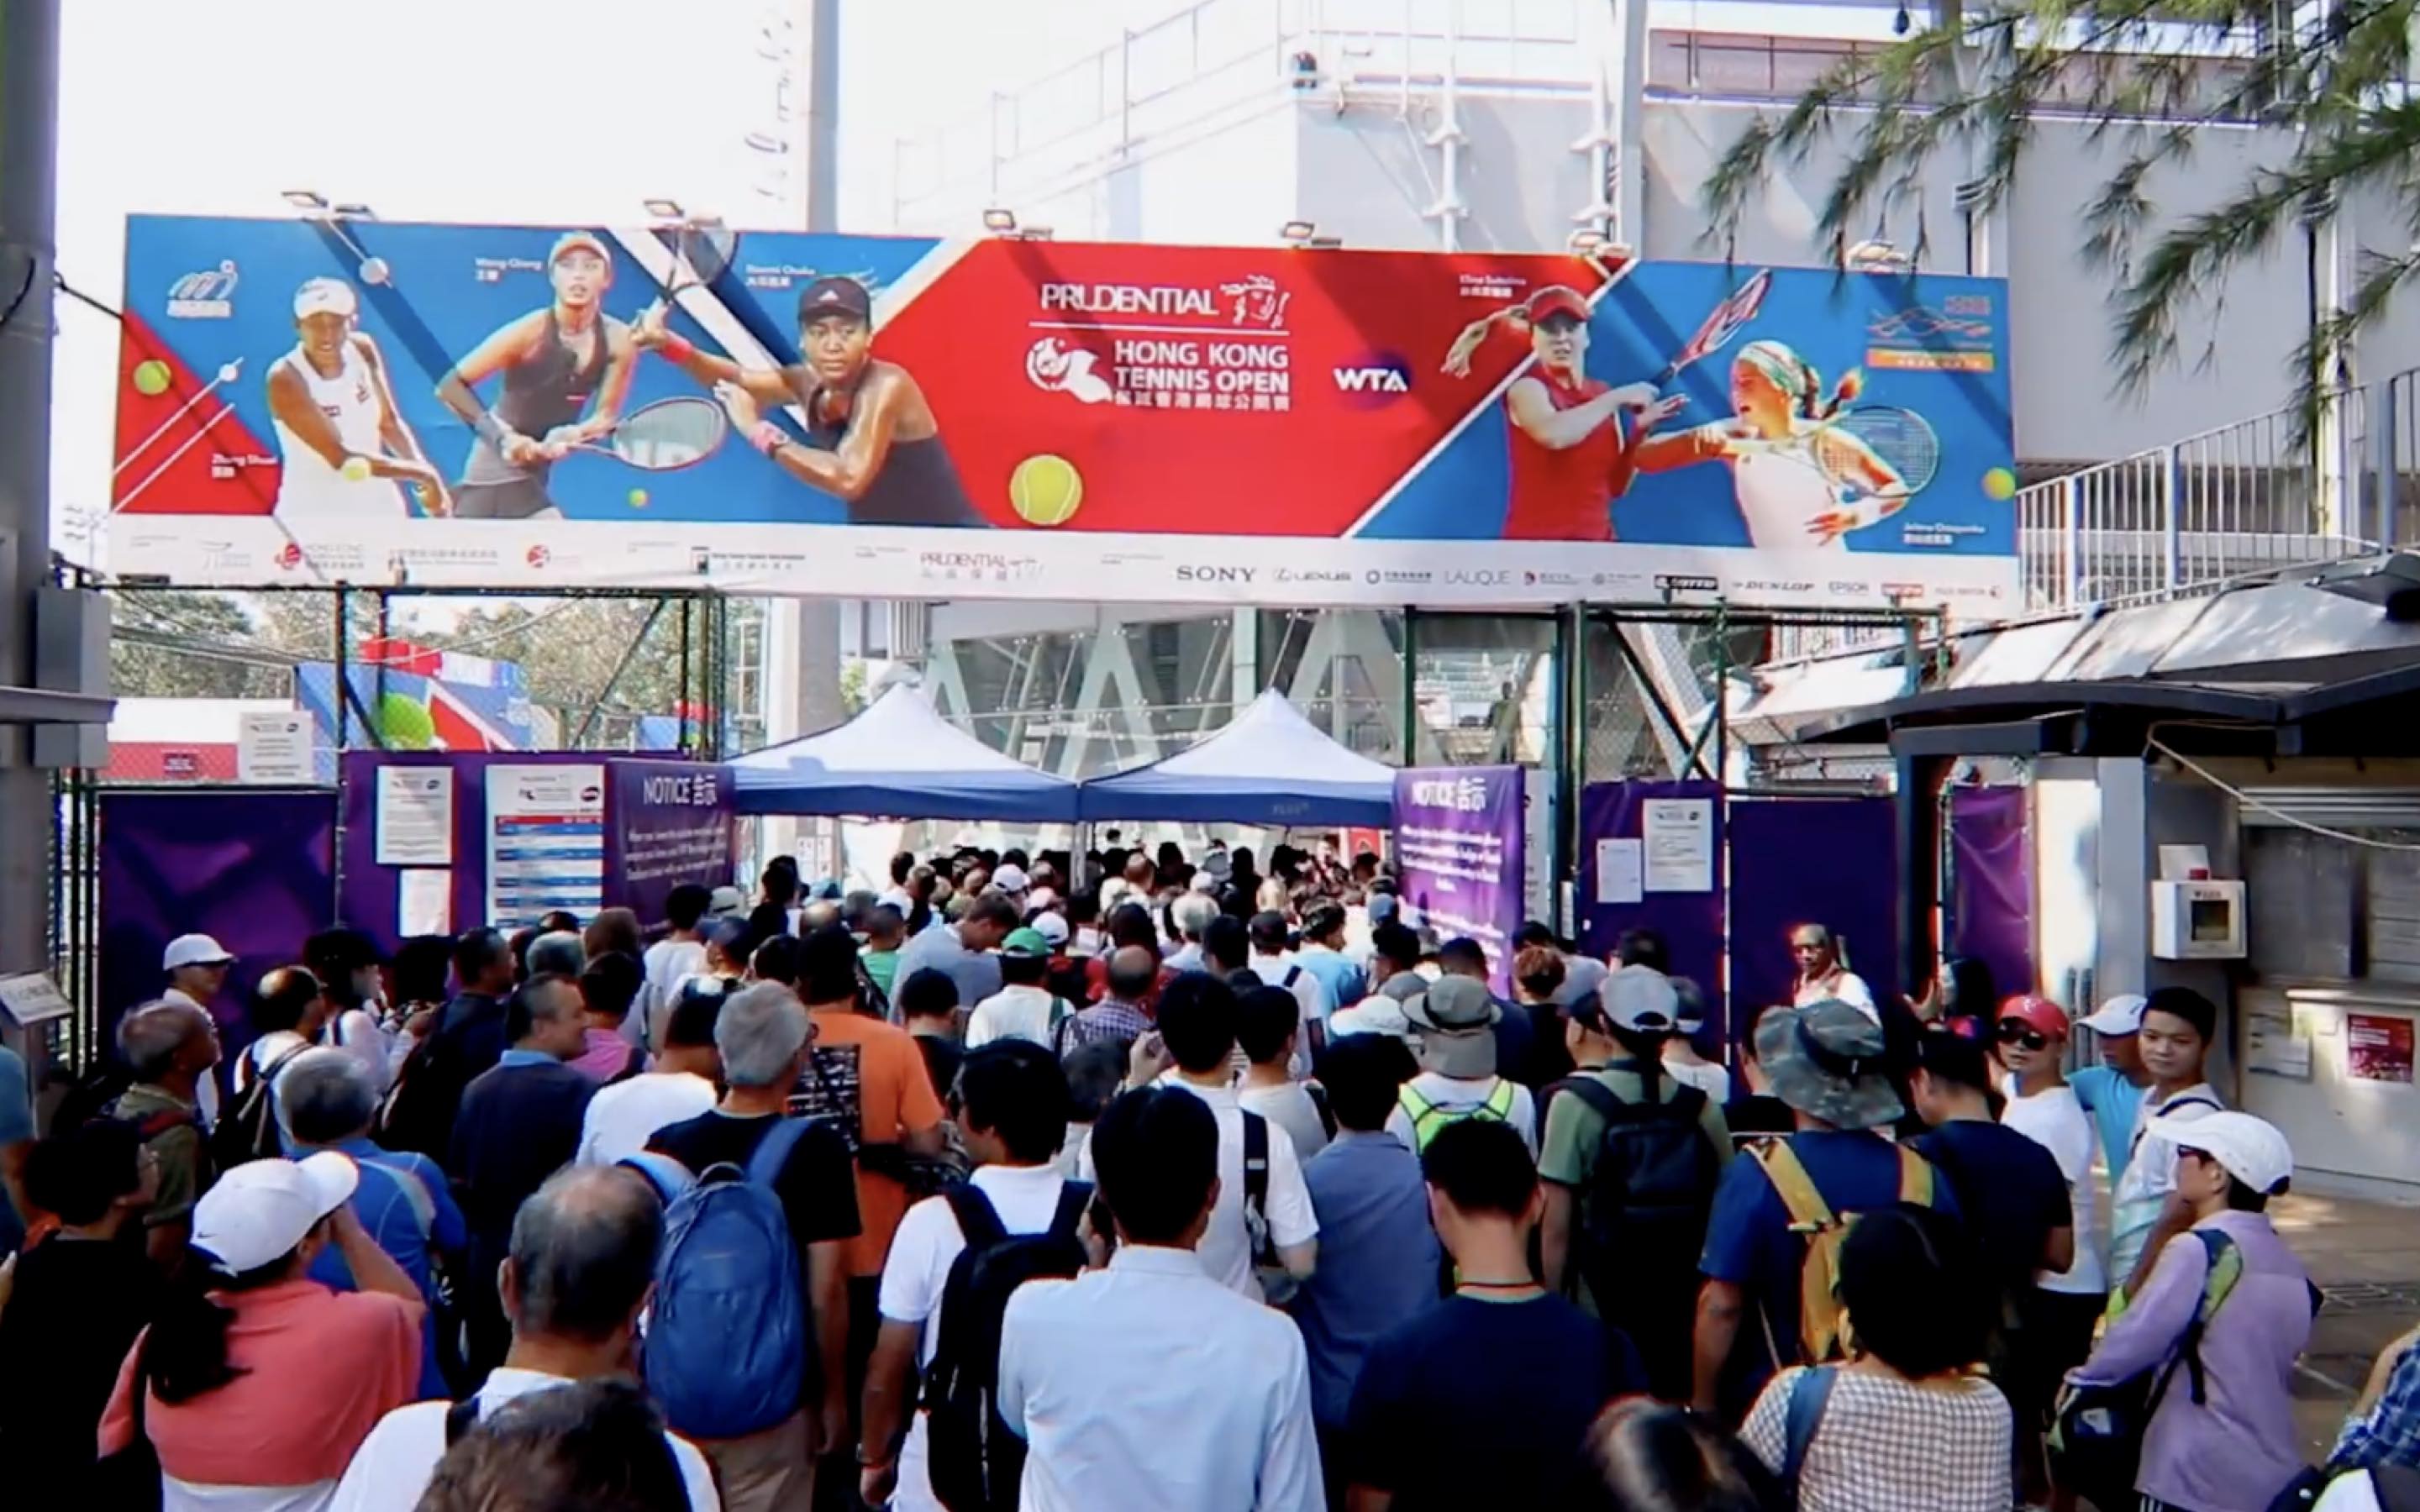 Screengrab from a promotional video for the Hong Kong Tennis Open in 2018. Screengrab via YouTube.